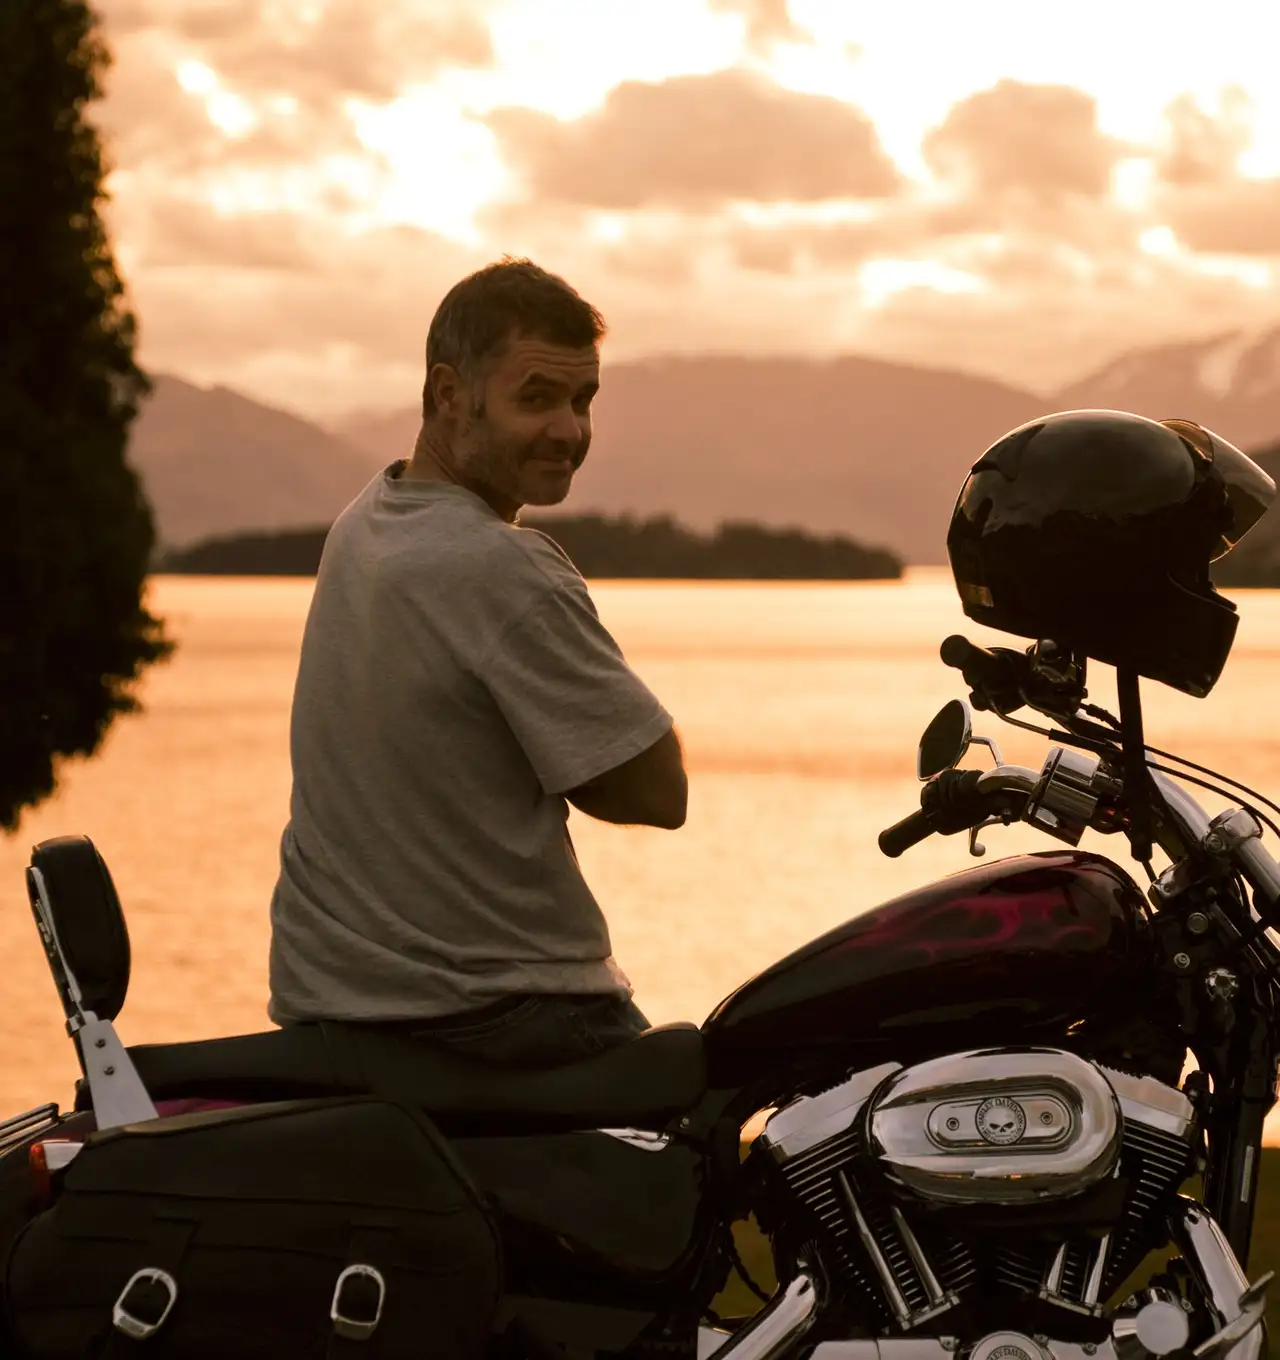 A man leaning against a motorcycle at sunset